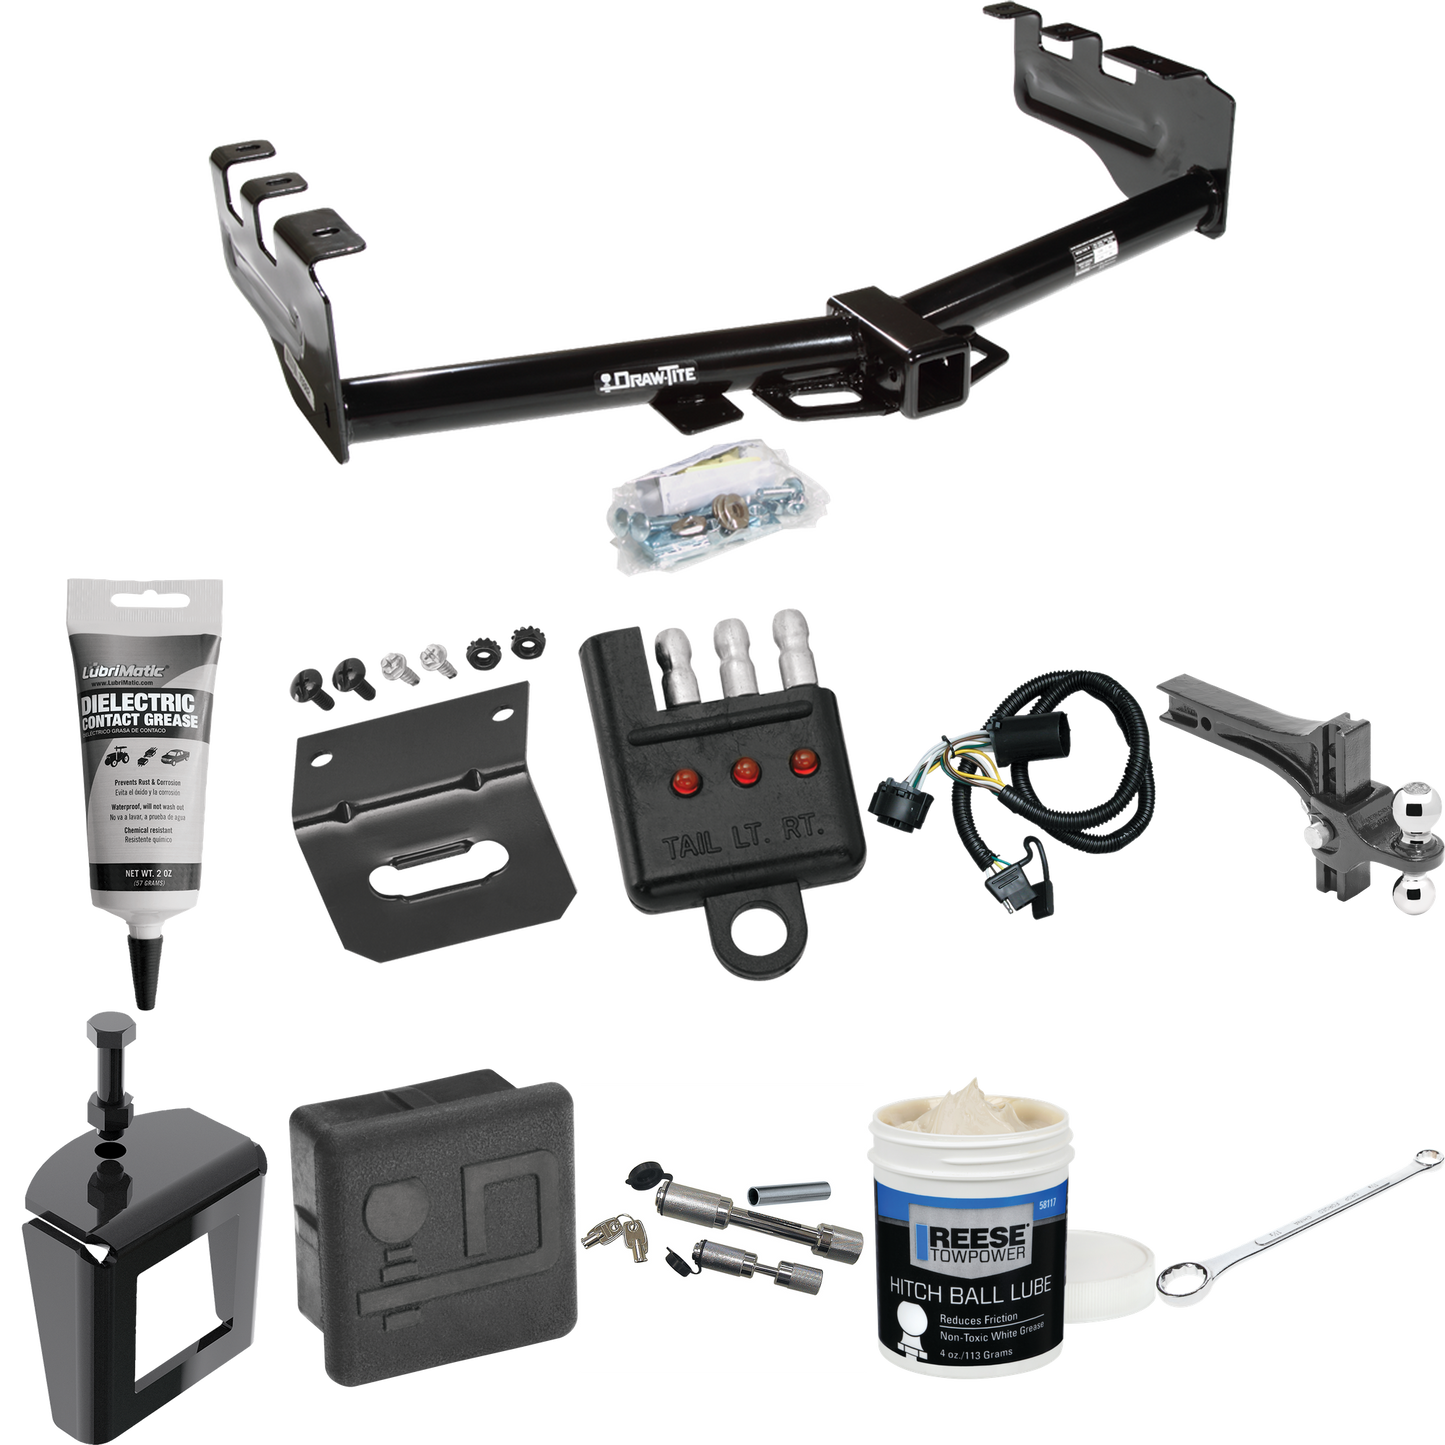 Fits 2007-2013 GMC Sierra 1500 Trailer Hitch Tow PKG w/ 4-Flat Wiring + Dual Adjustable Drop Rise Ball Ball Mount 2" & 2-5/16" Trailer Balls + Wiring Bracket + Hitch Cover + Dual Hitch & Coupler Locks + Wiring Tester + Ball Lube + Electric Grease + B